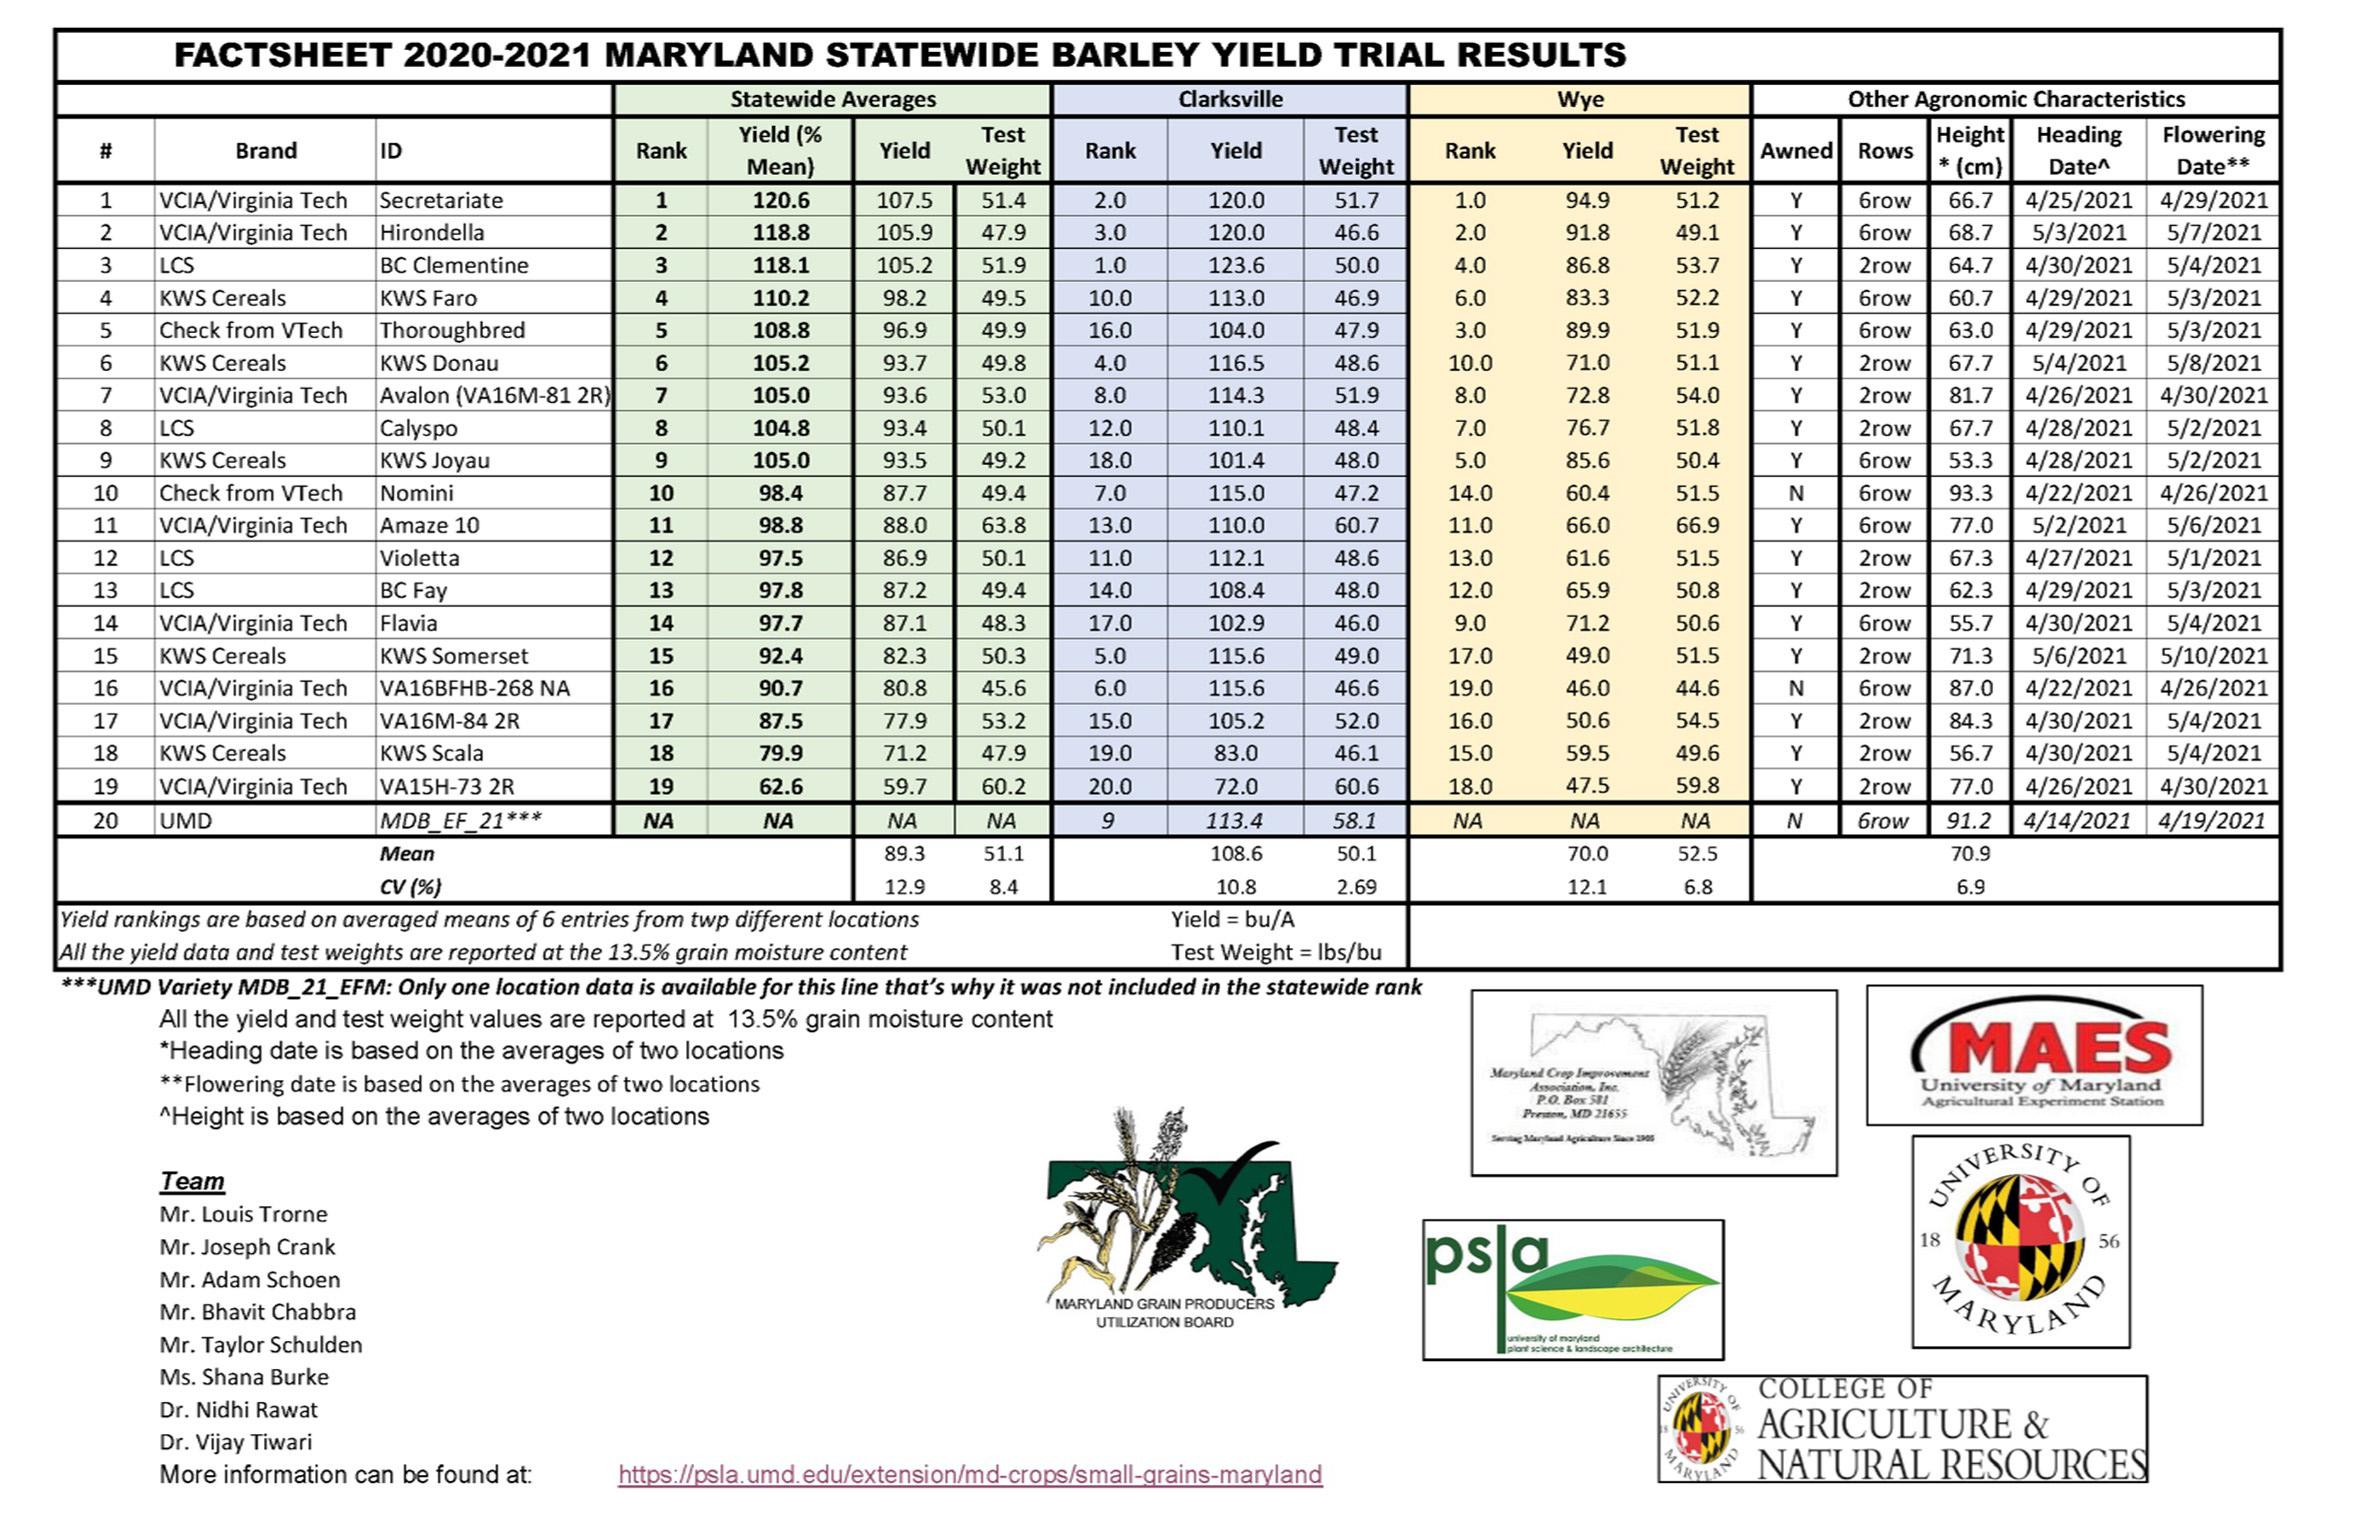 Factsheet 2020-2021: Maryland Statewide Barley Yield Trial Results (pdf)